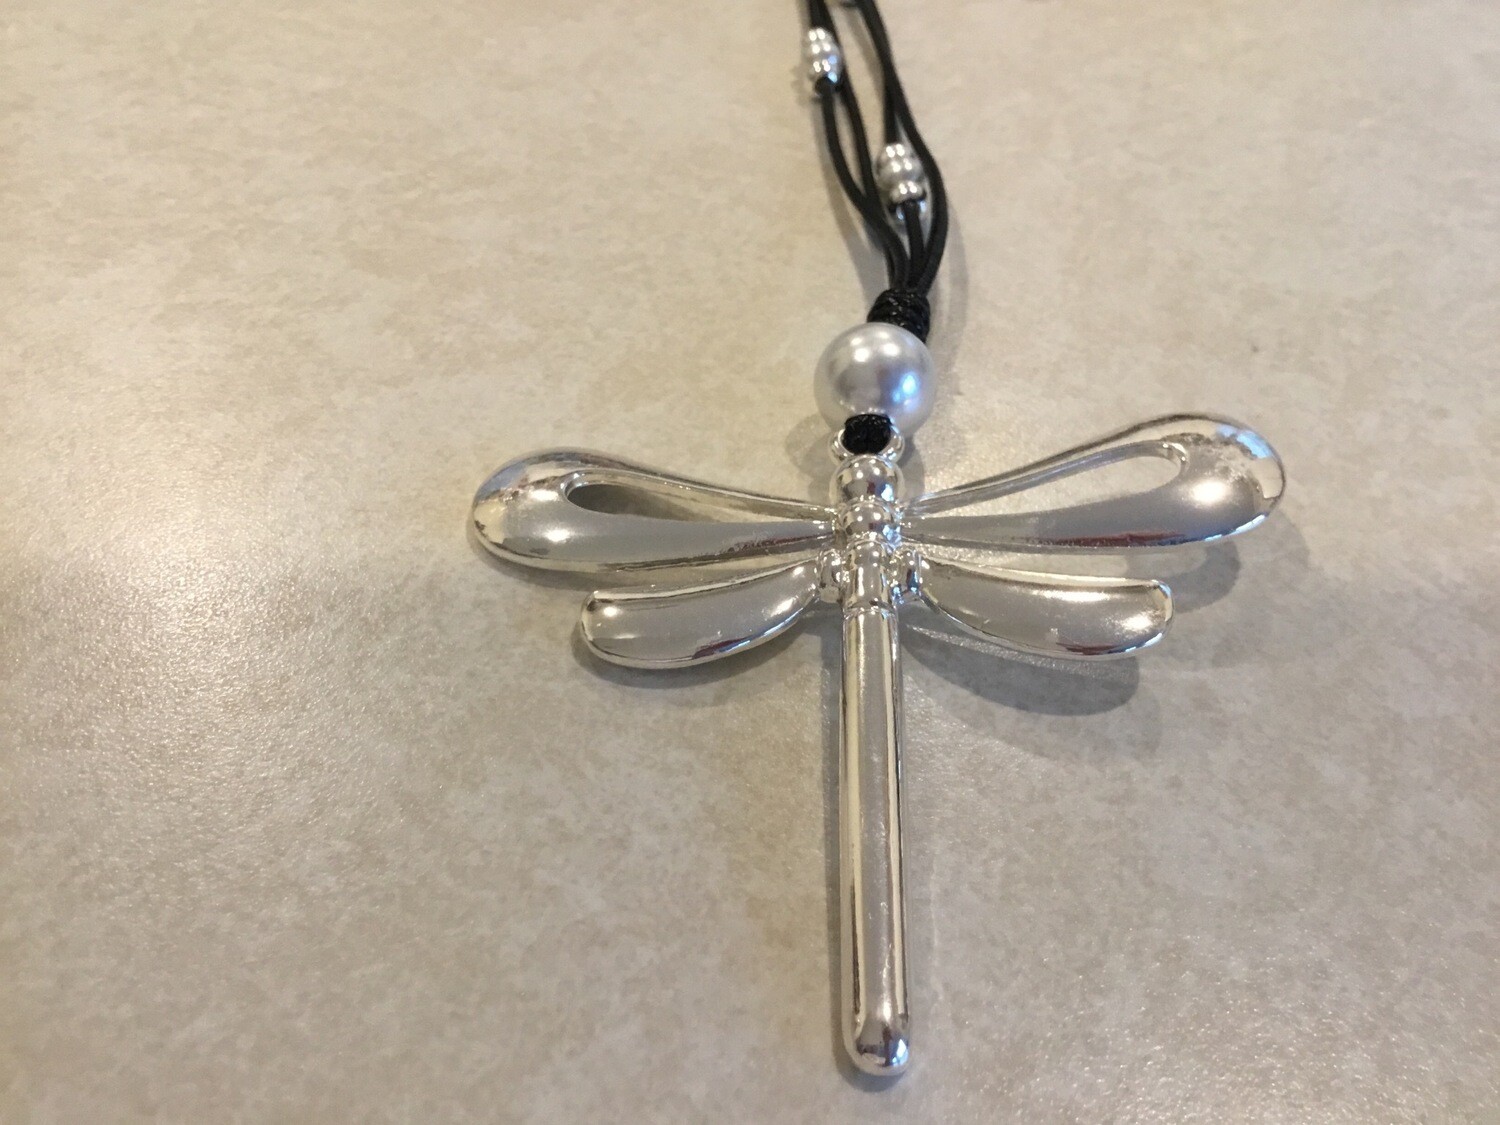 Long Black Leather With Silver Beads, Pearl And Shiny Dragonfly